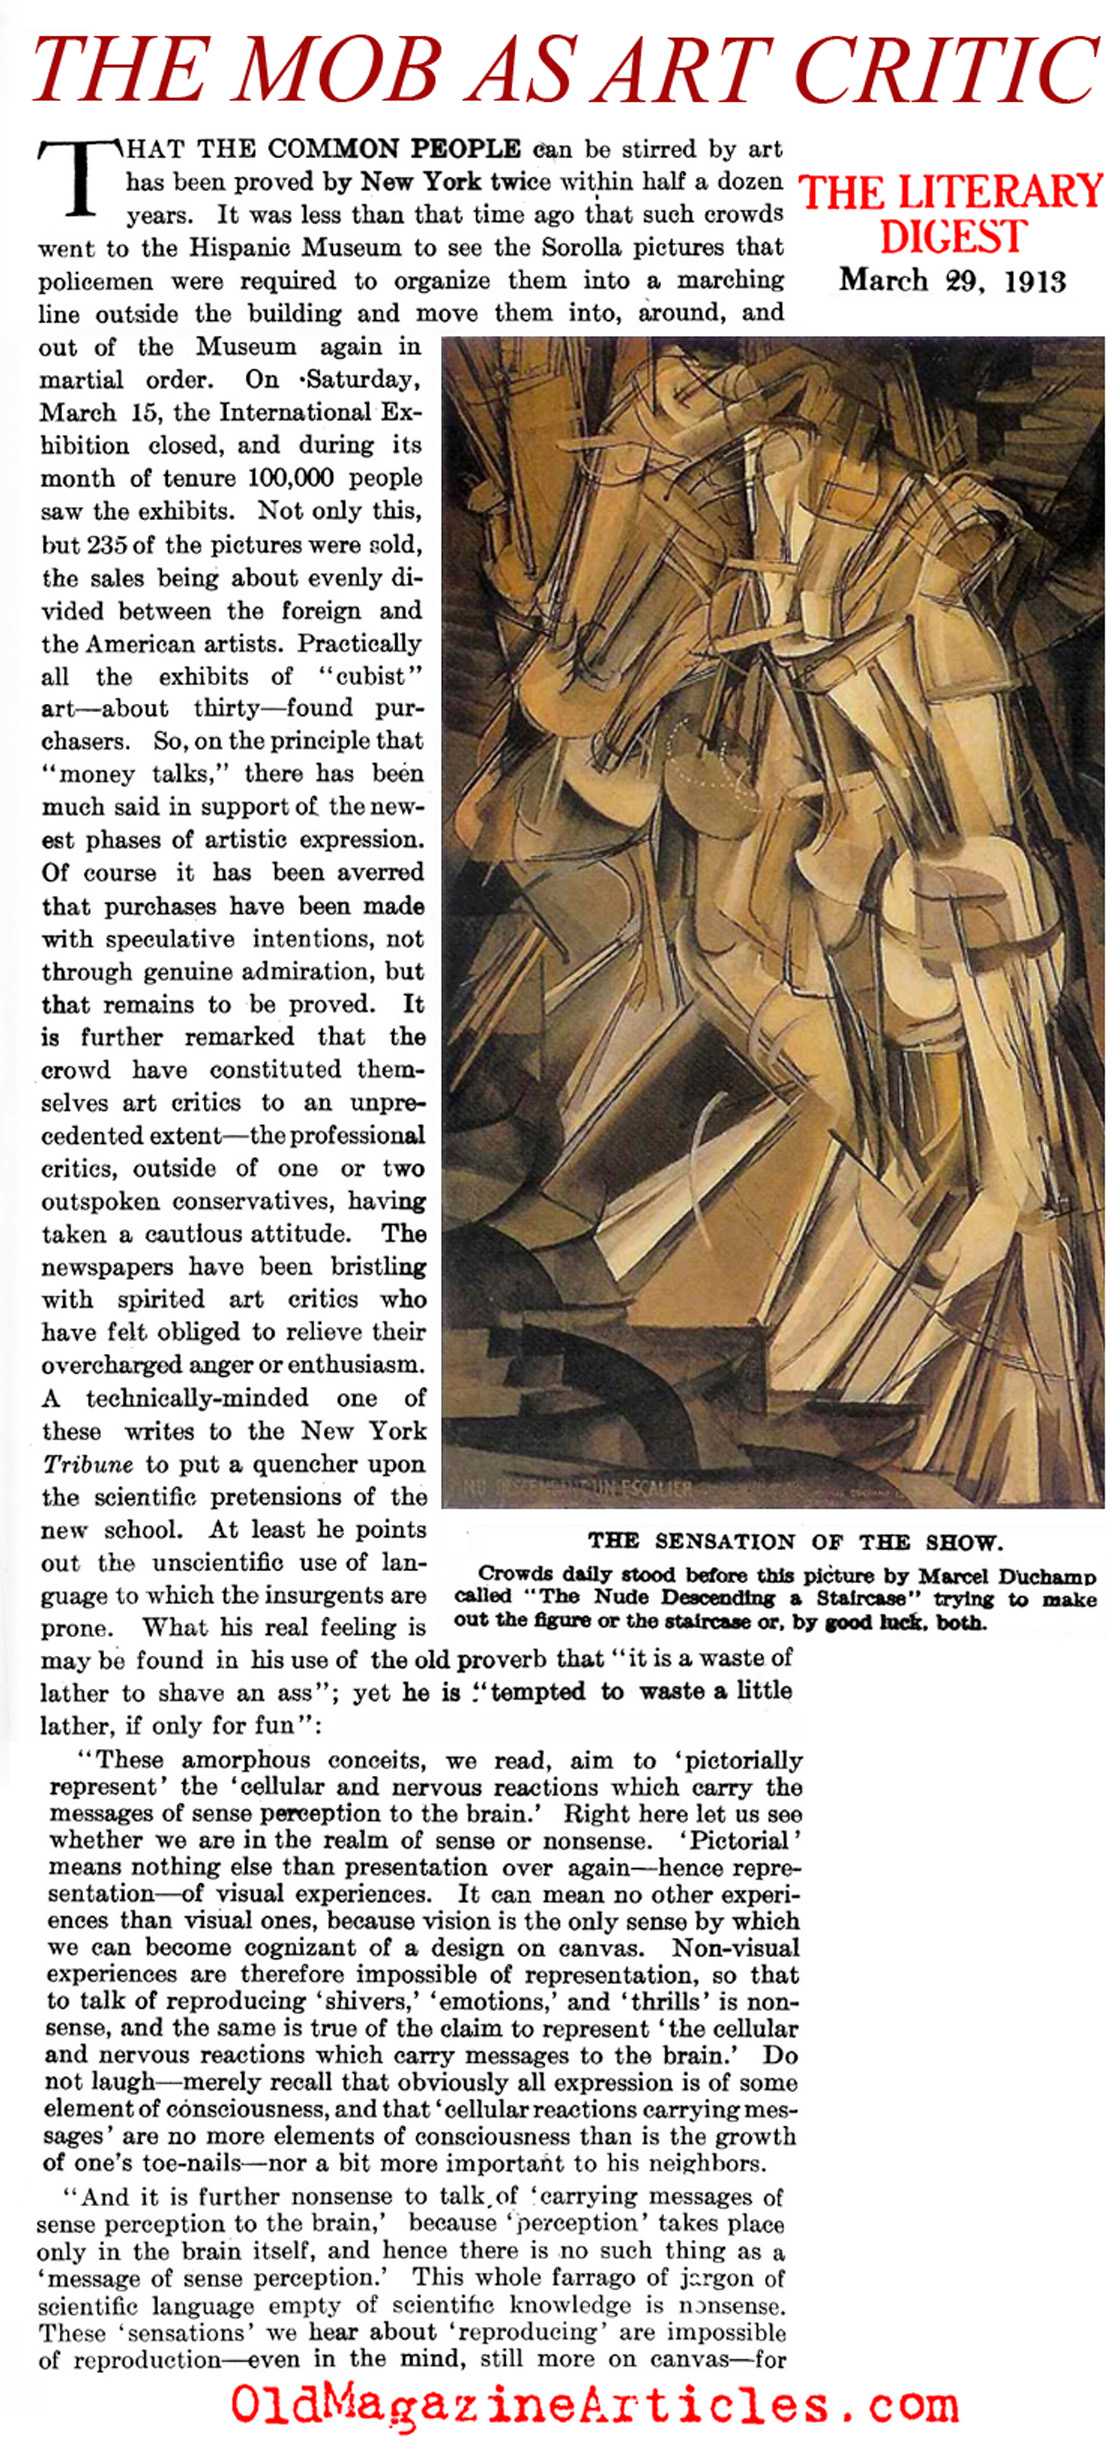 The  Armory Show of 1913 (Literary Digest, 1913)